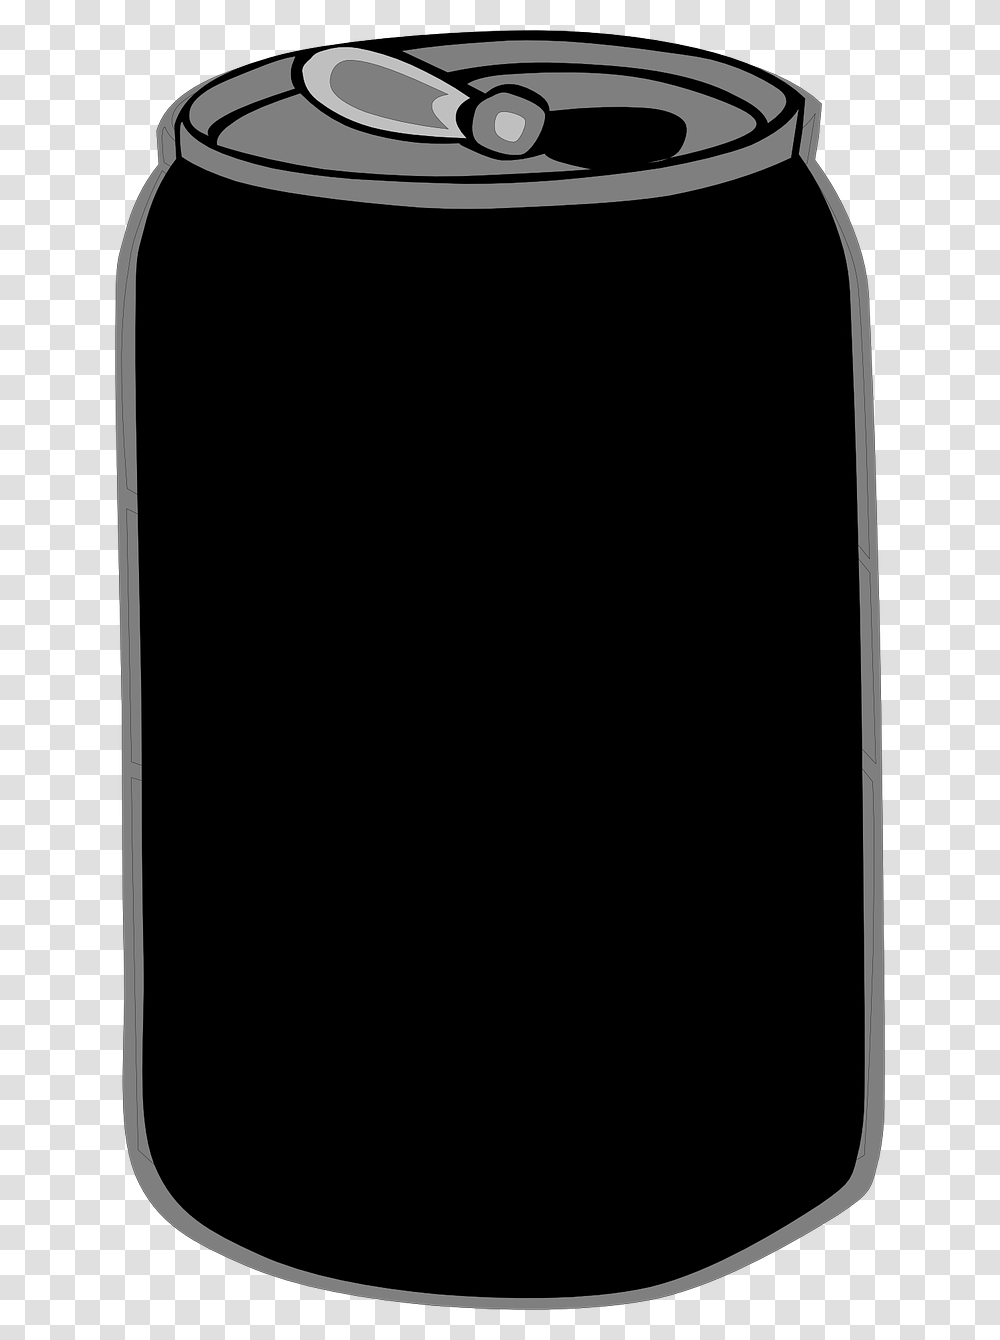 Black Soft Drink Can, Phone, Electronics, Mobile Phone, Cell Phone Transparent Png